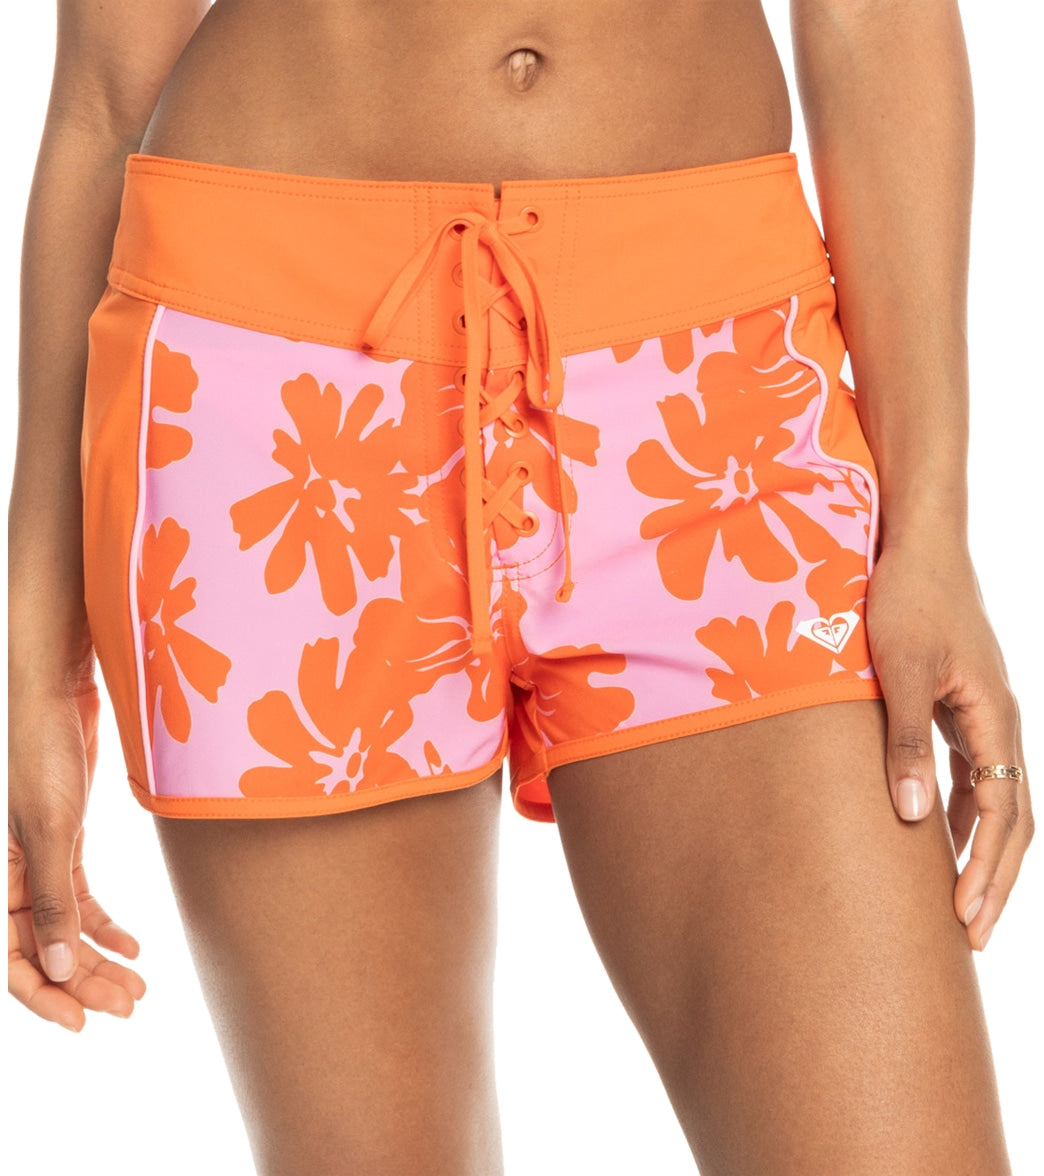 Roxy Women's 2" Surf Kind Kate Board Shorts at SwimOutlet.com